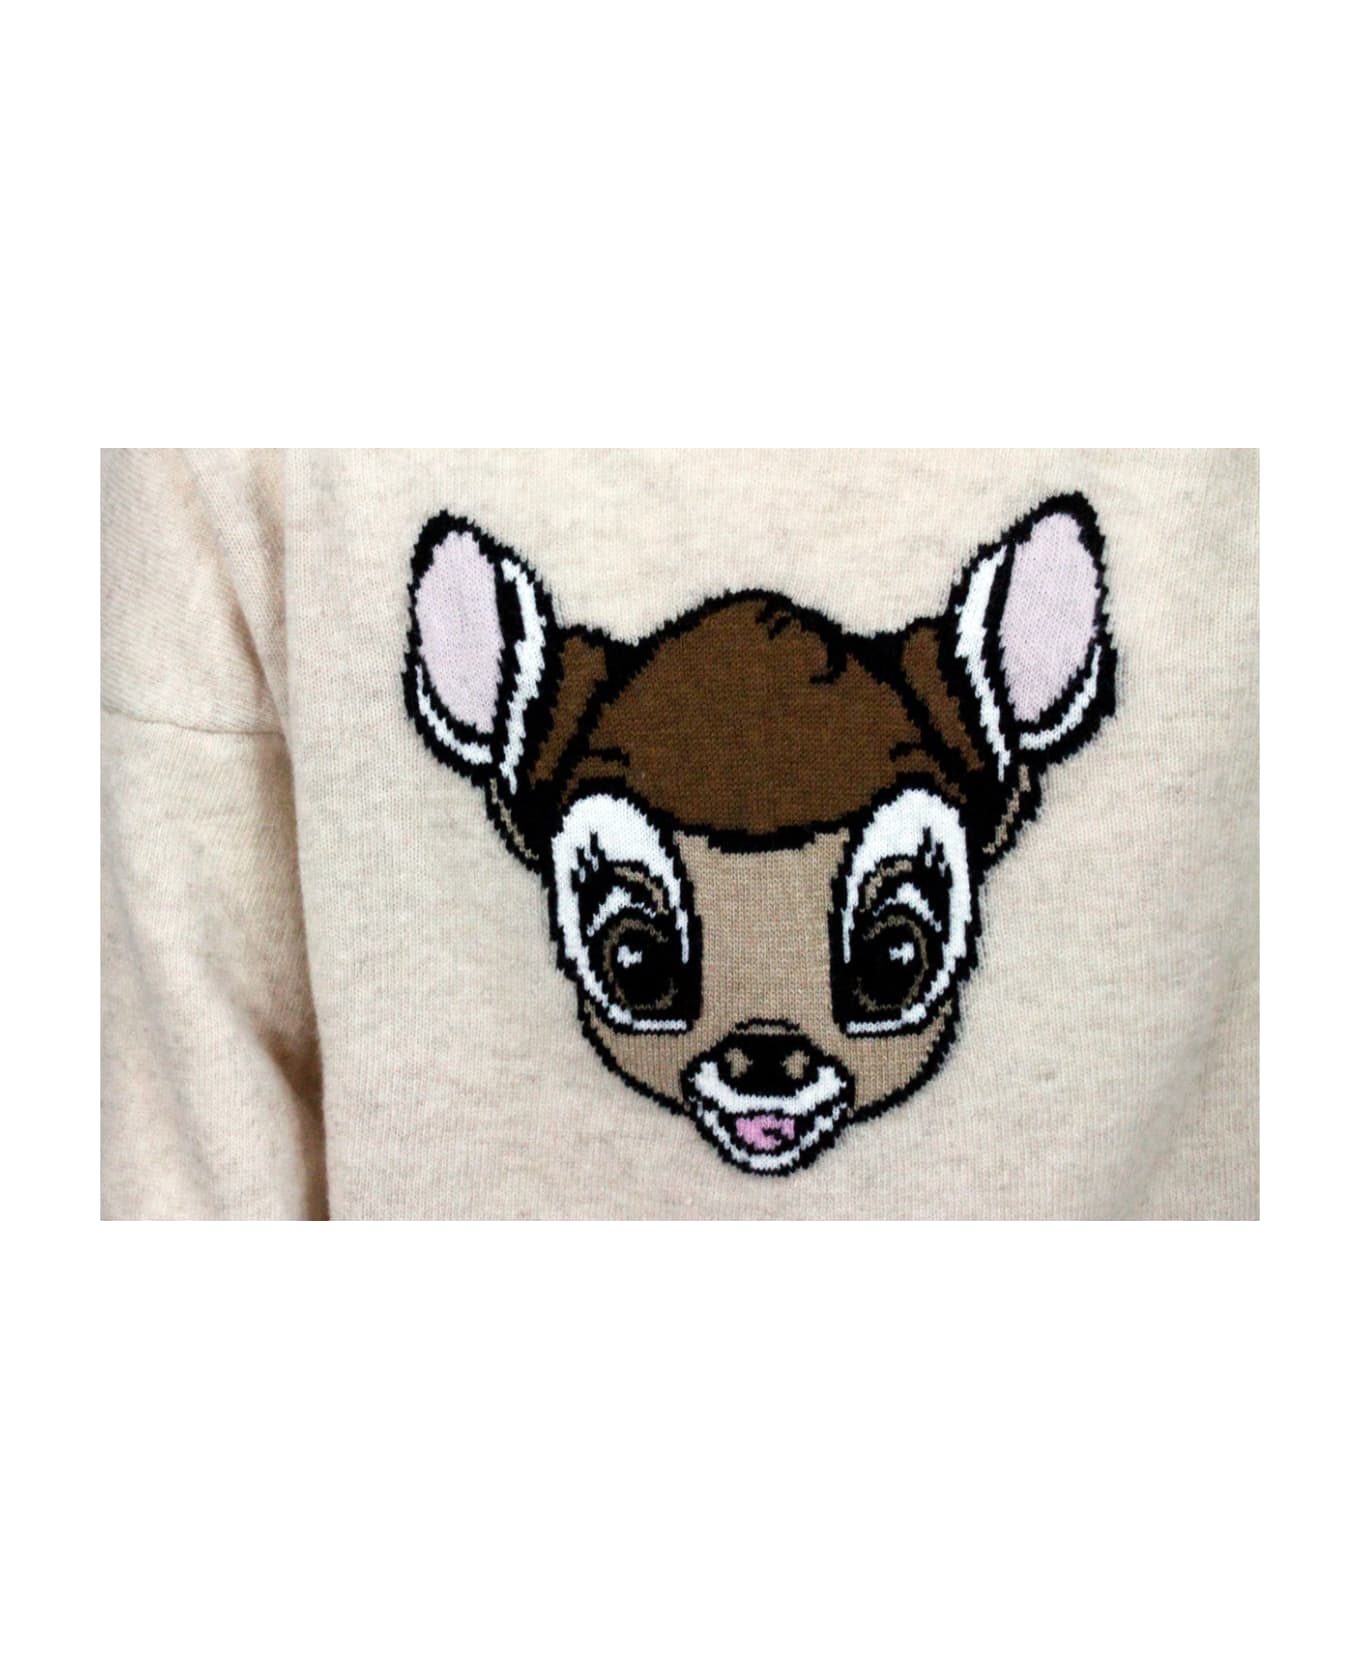 Monnalisa Crewneck Sweater In Wool With Inlay On The Front - Beige ニットウェア＆スウェットシャツ